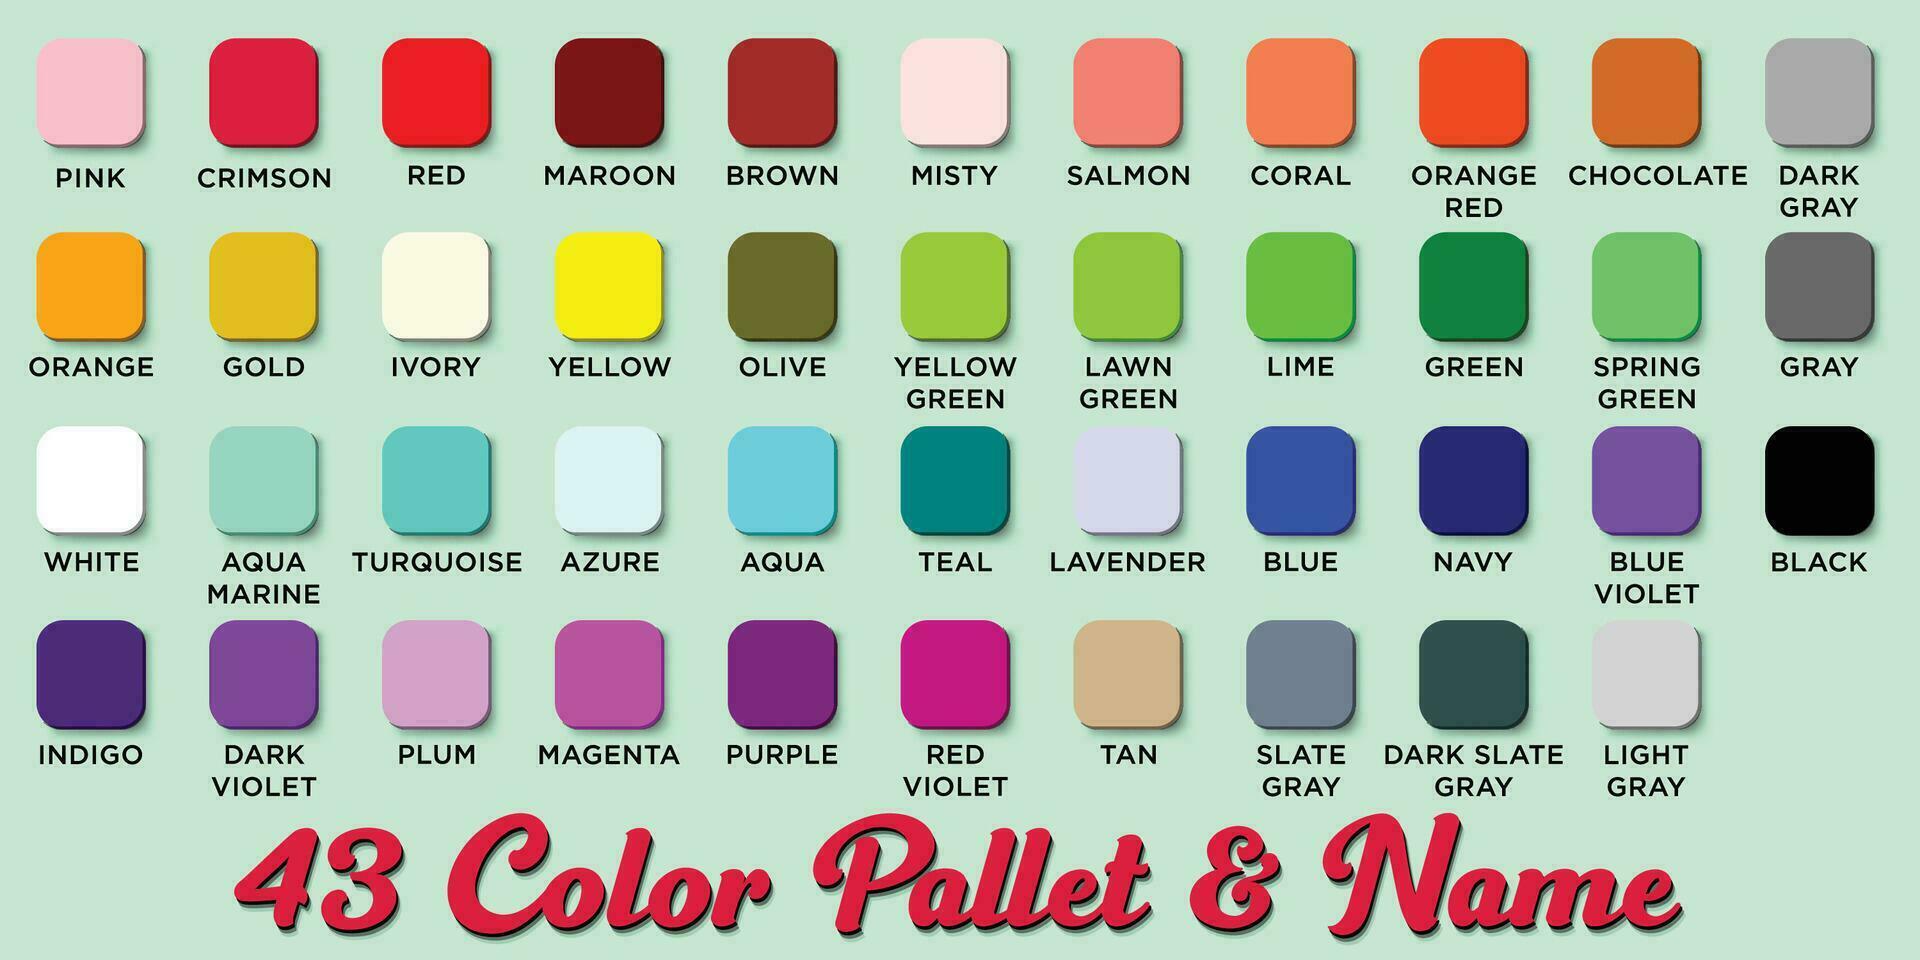 Basic Color Name And Palette Trend Colors Guide With Name Color vector